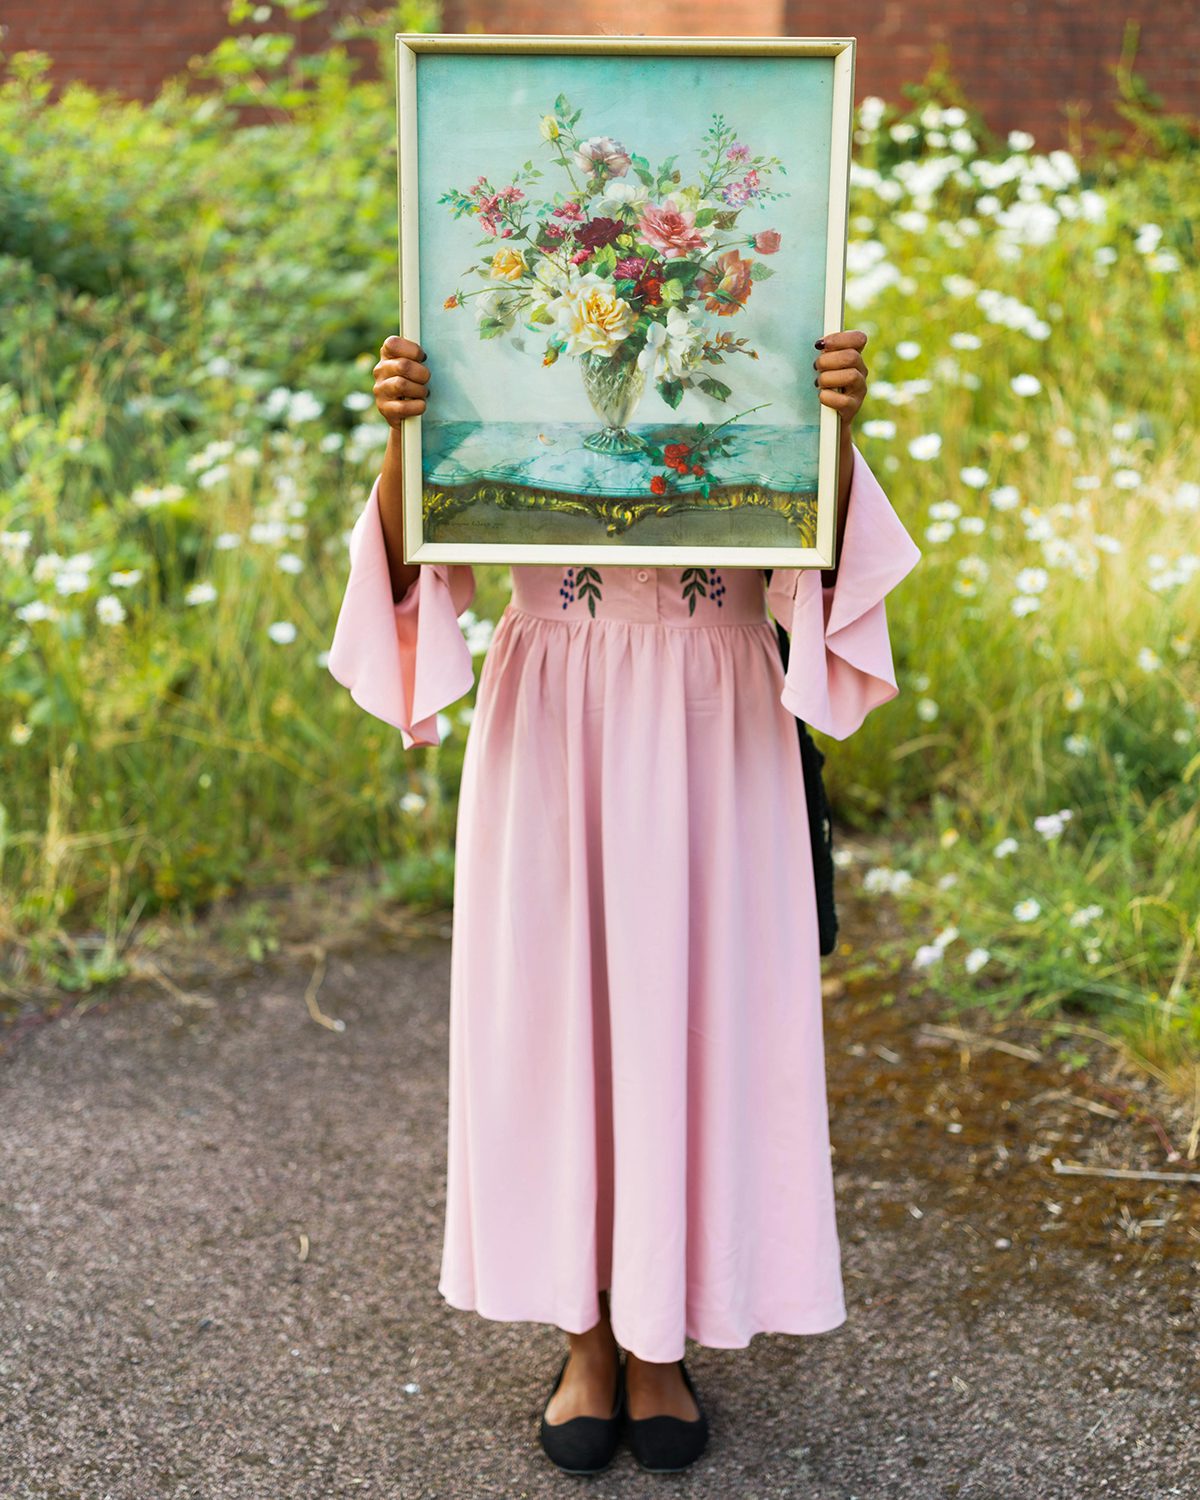 Image shows a person in a pink outfit holding a picture of a vase of flowers over their face, taken from Kavi Pujara's book This Golden Mile